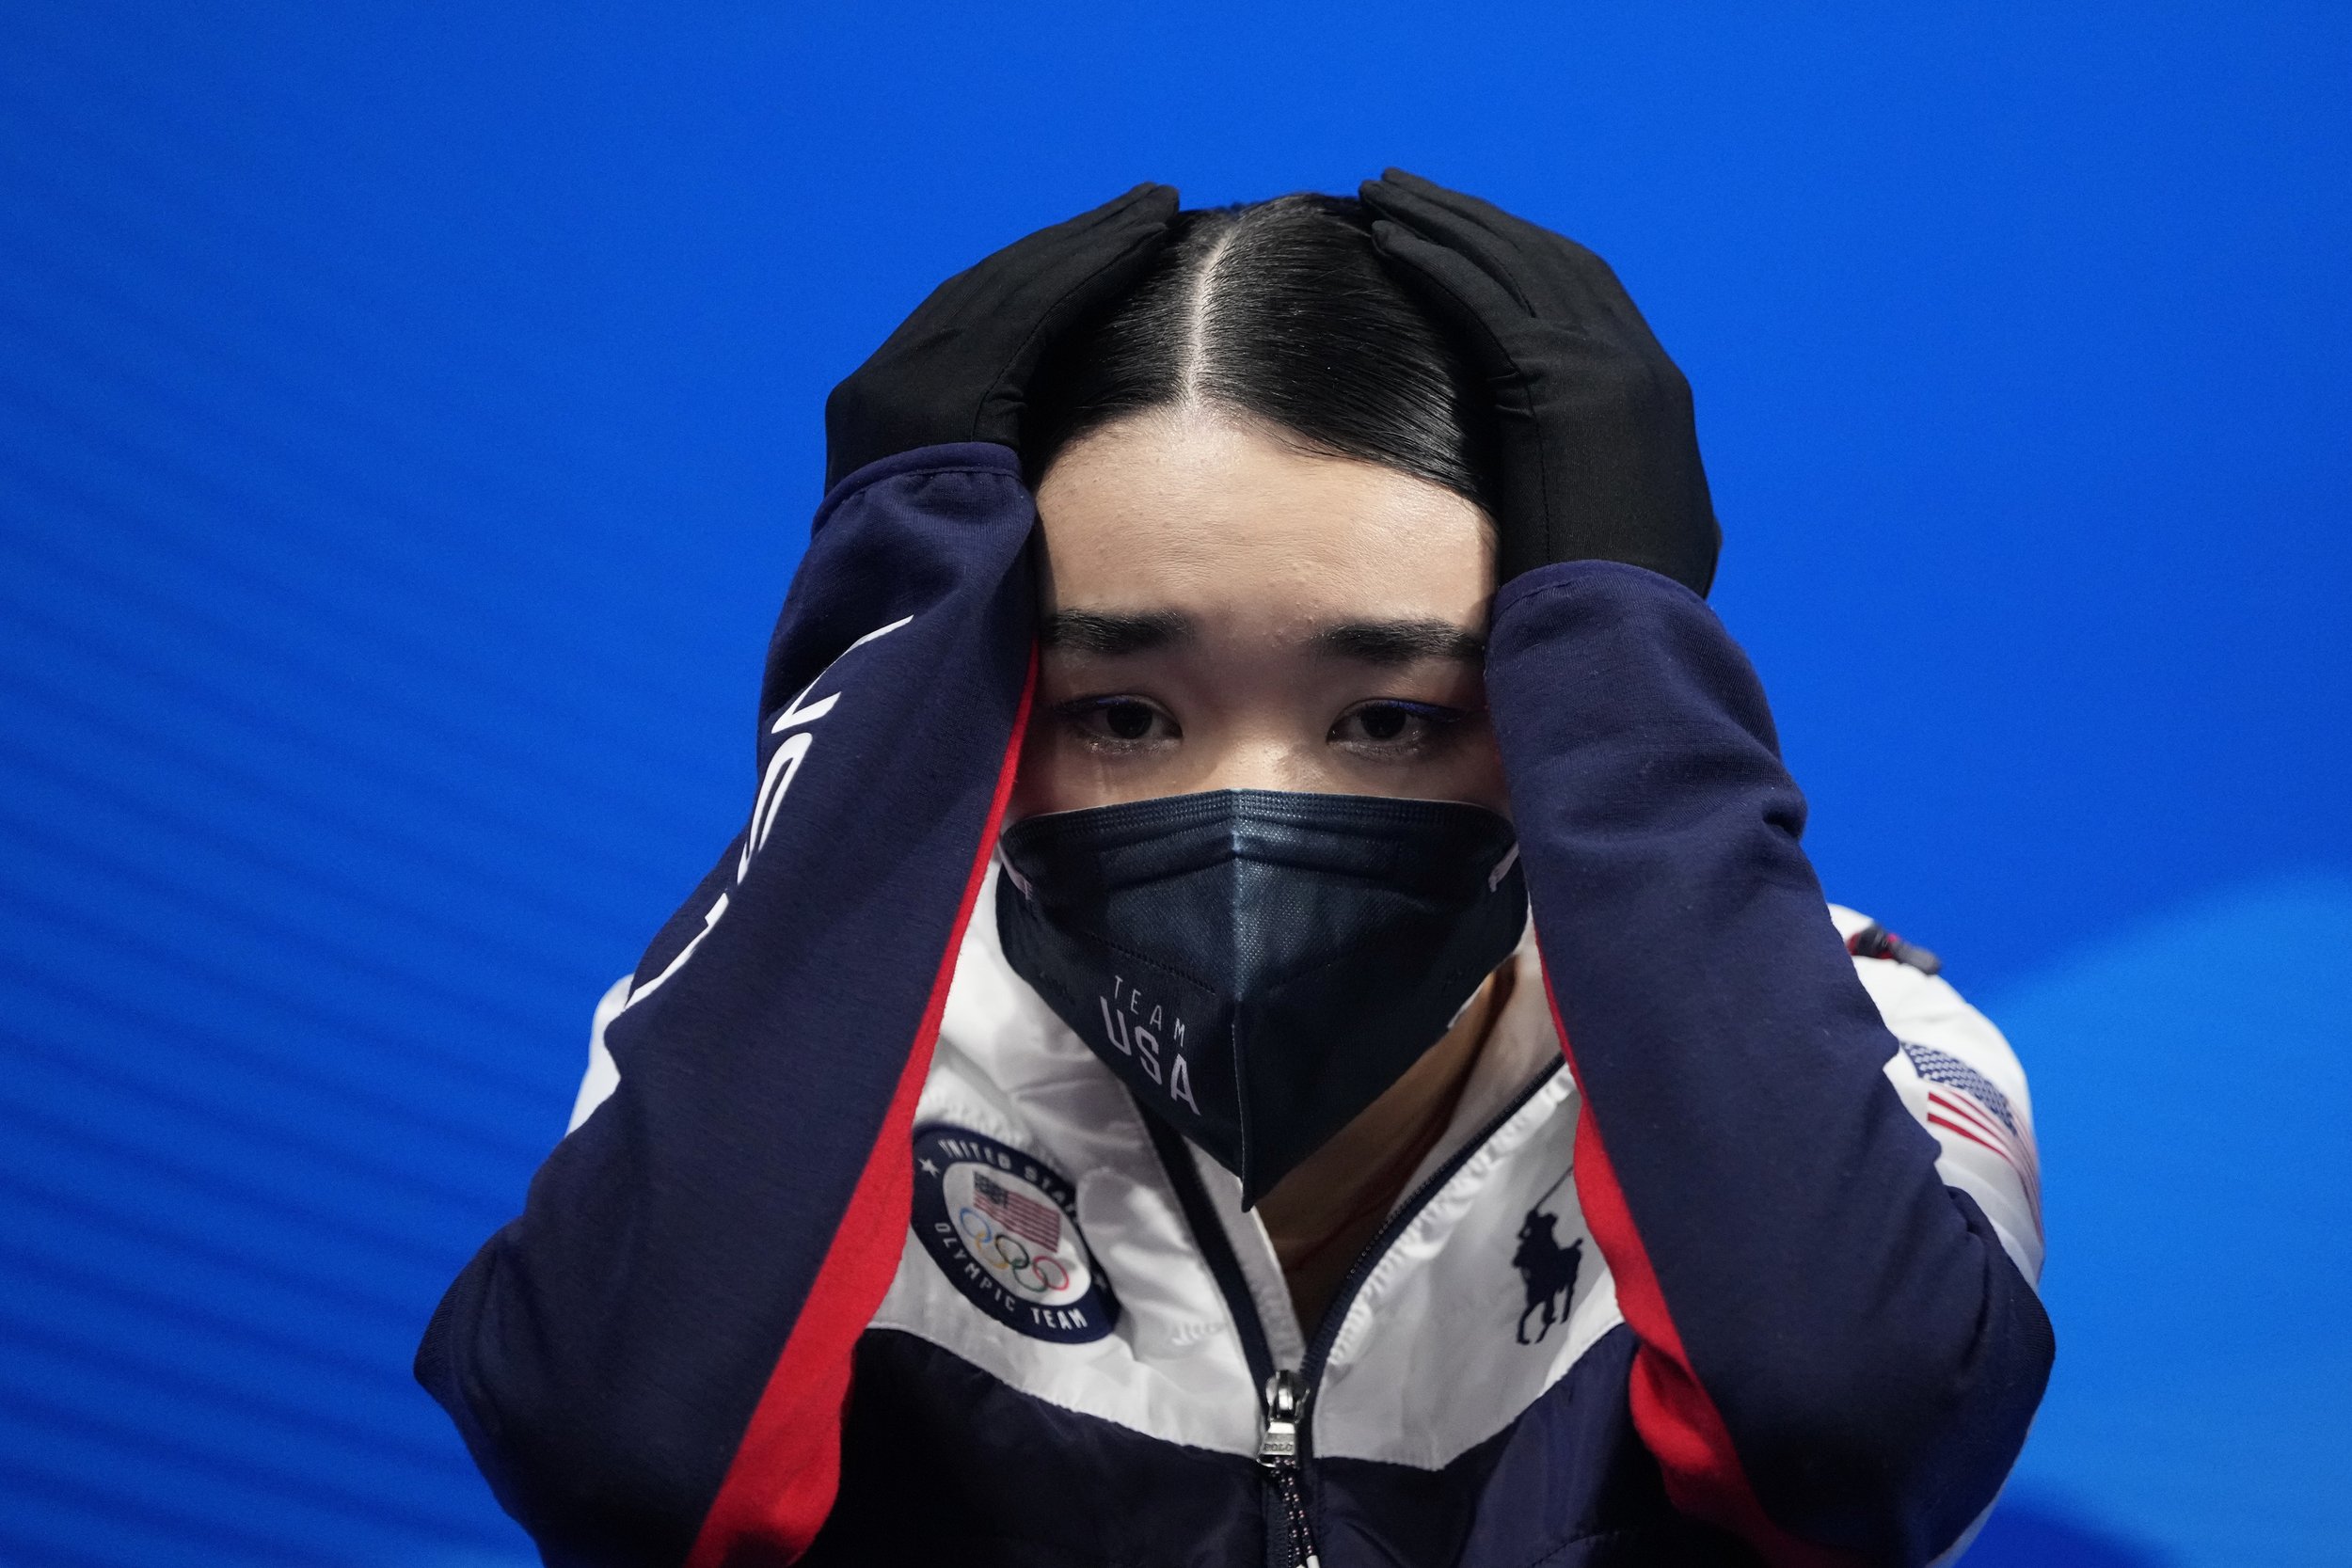  Karen Chen, of the United States, reacts after the women's short program during the figure skating at the 2022 Winter Olympics, Tuesday, Feb. 15, 2022, in Beijing. (AP Photo/Natacha Pisarenko) 